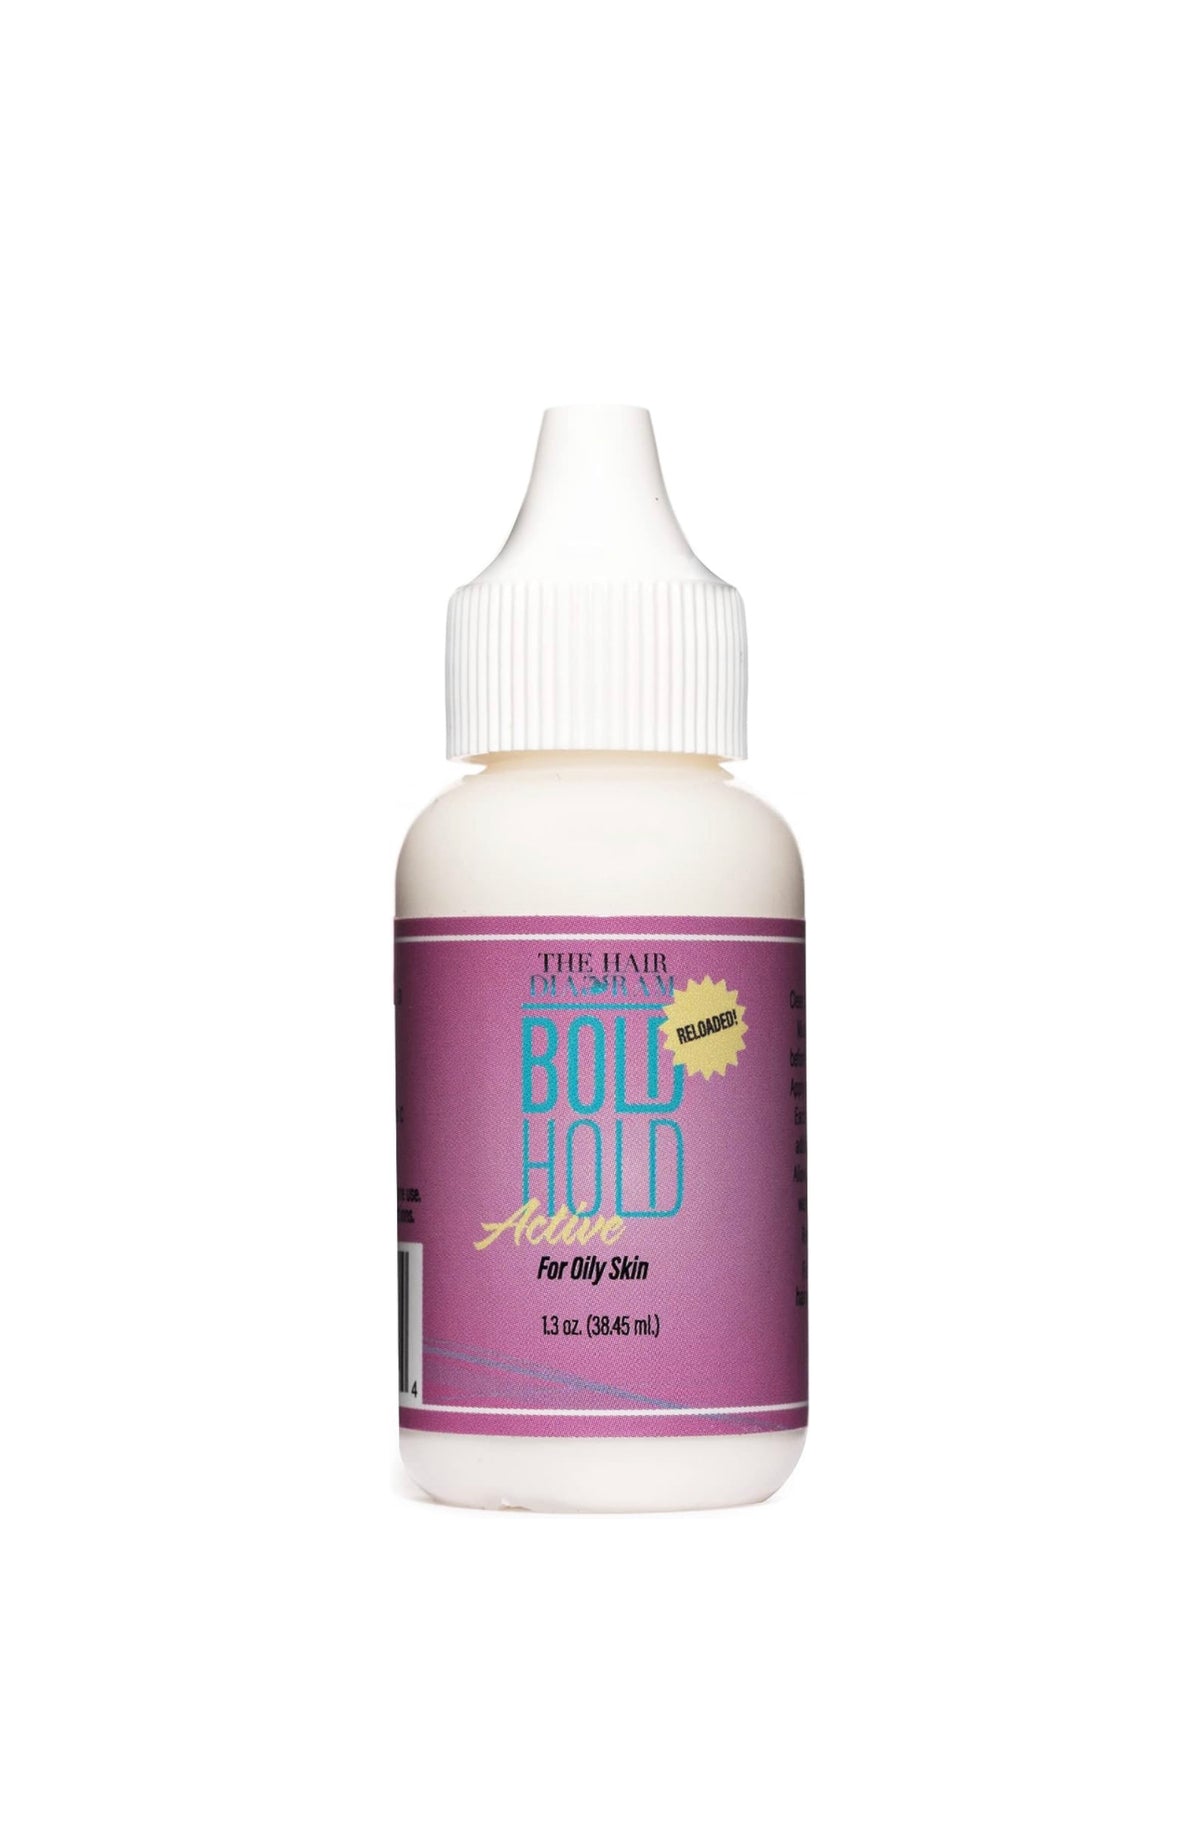 BOLD HOLD ACTIVE WIG GLUE